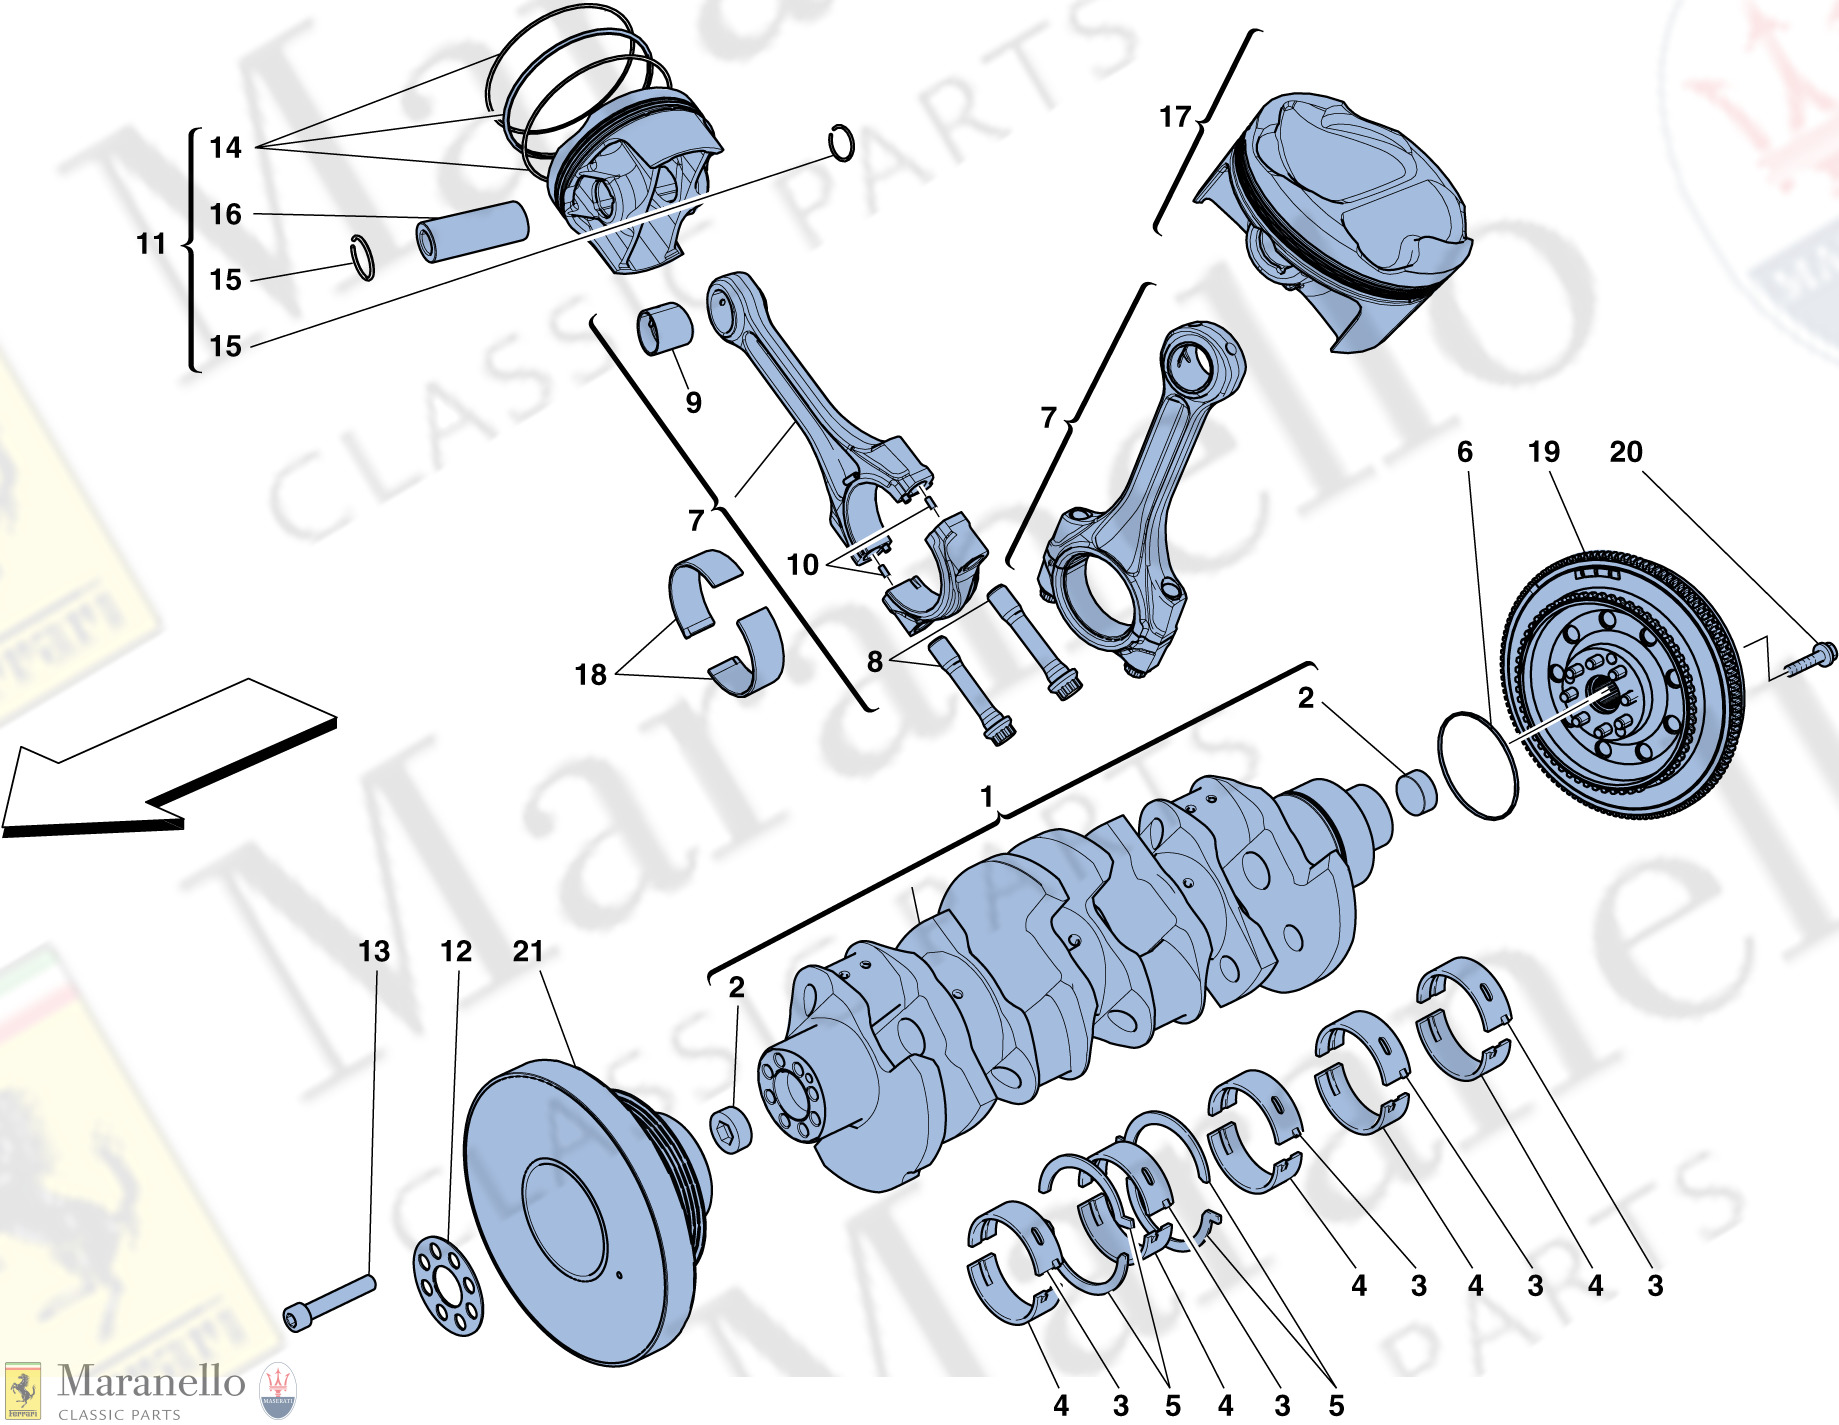 002 - Crankshaft - Connecting Rods And Pistons